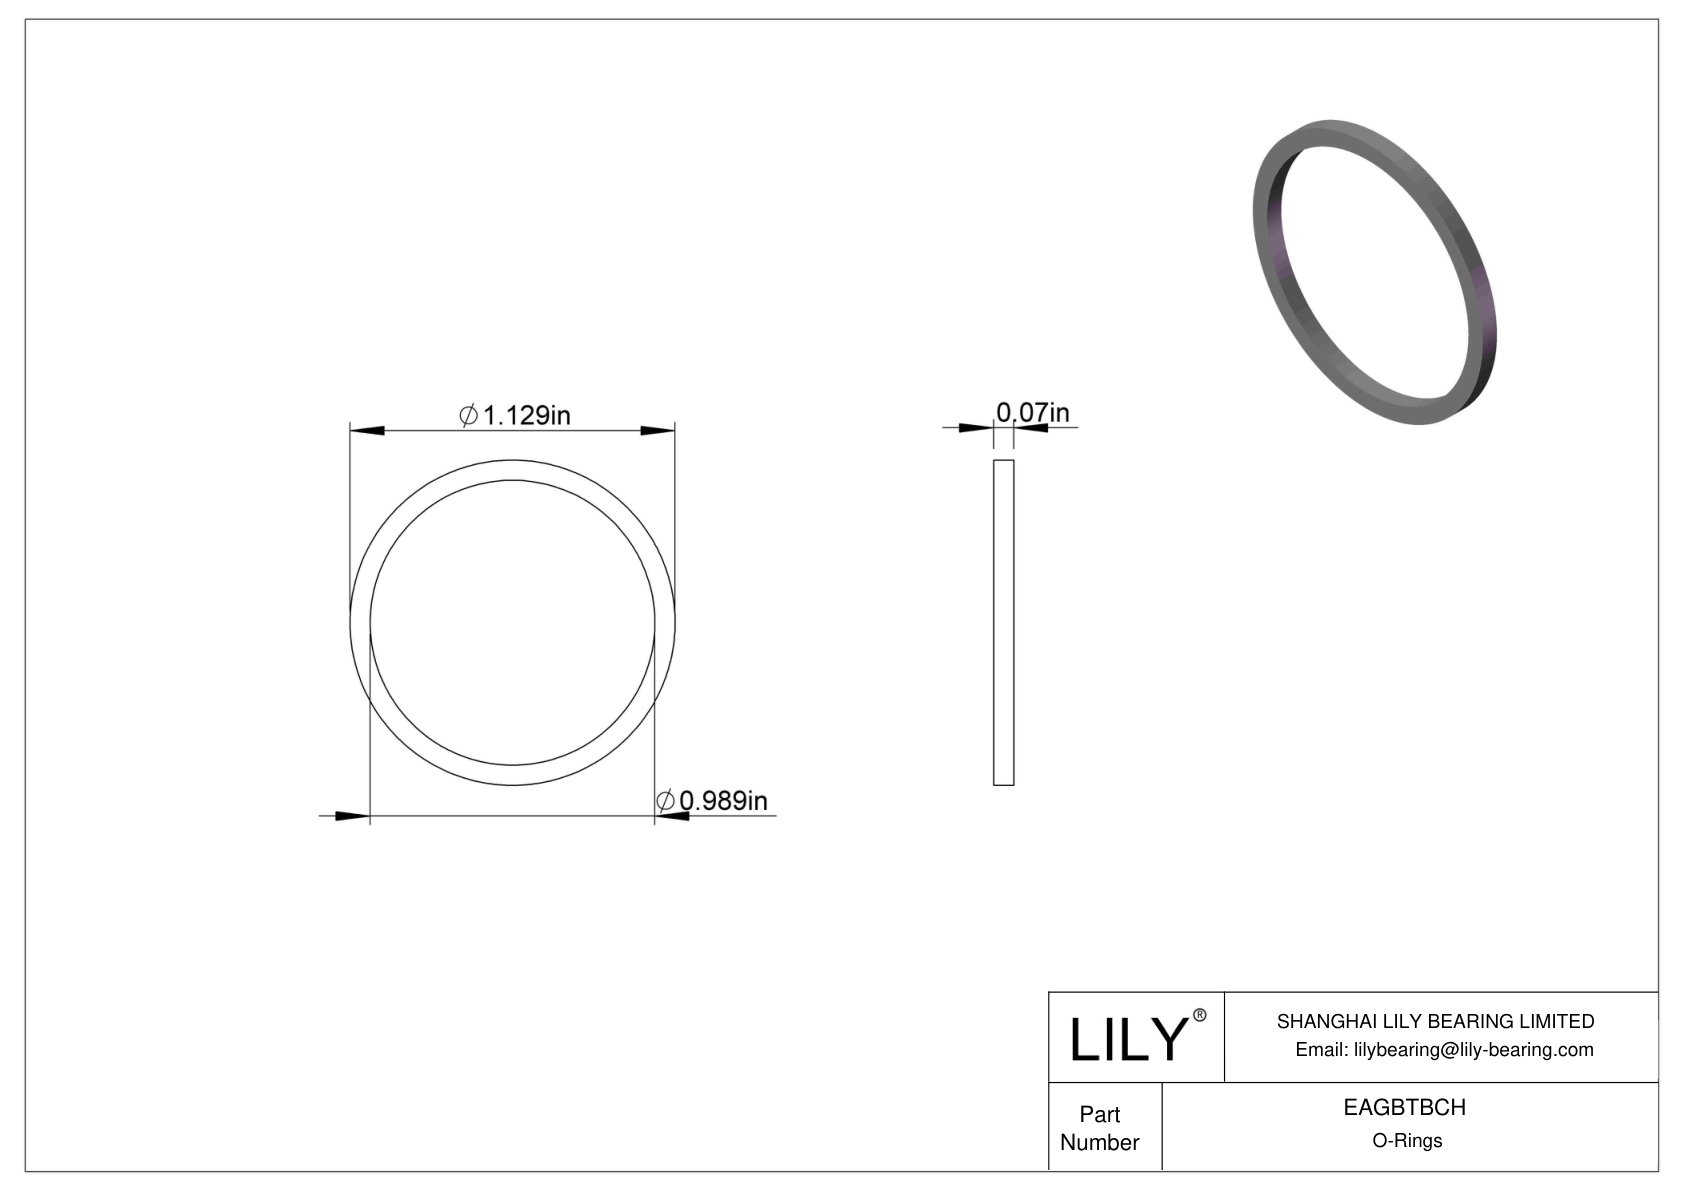 EAGBTBCH Oil Resistant O-Rings Square cad drawing